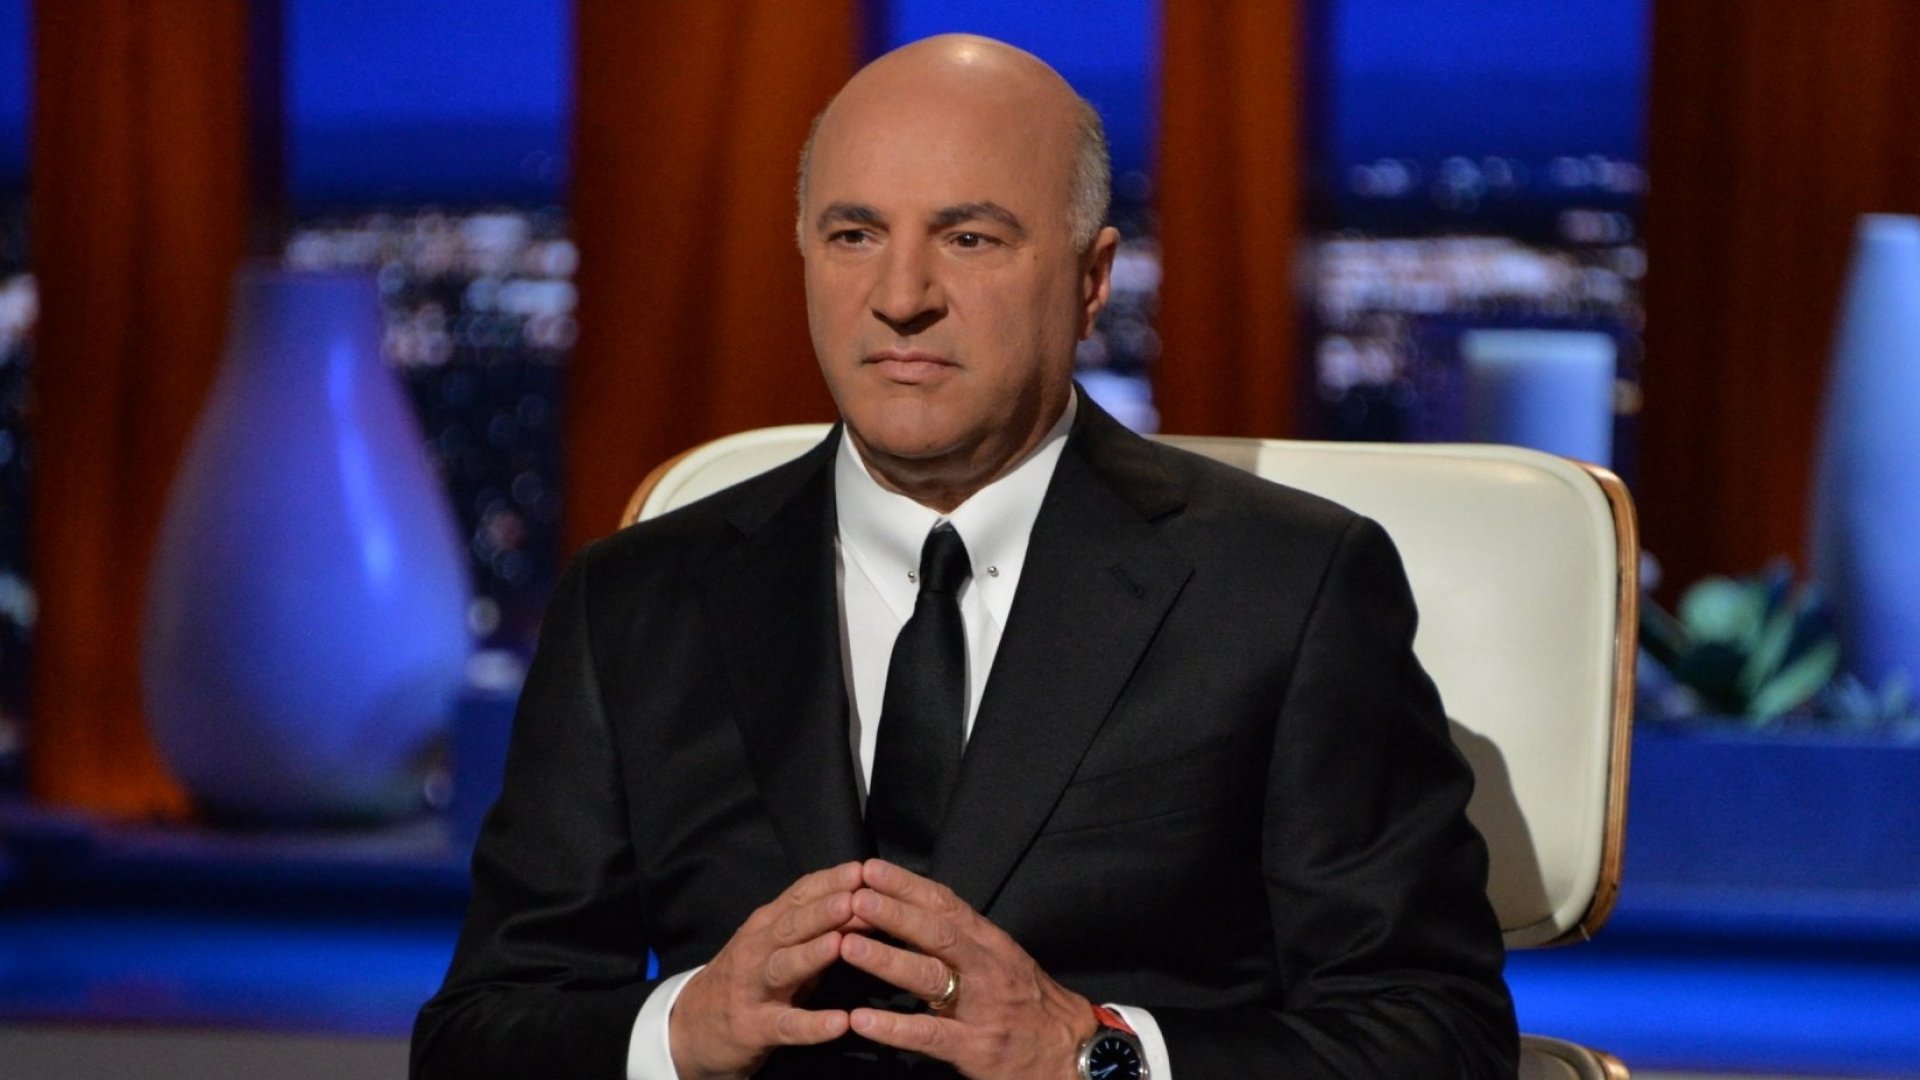 Kevin O’Leary Claims Crypto Destined For S&P500’s “12th Sector”